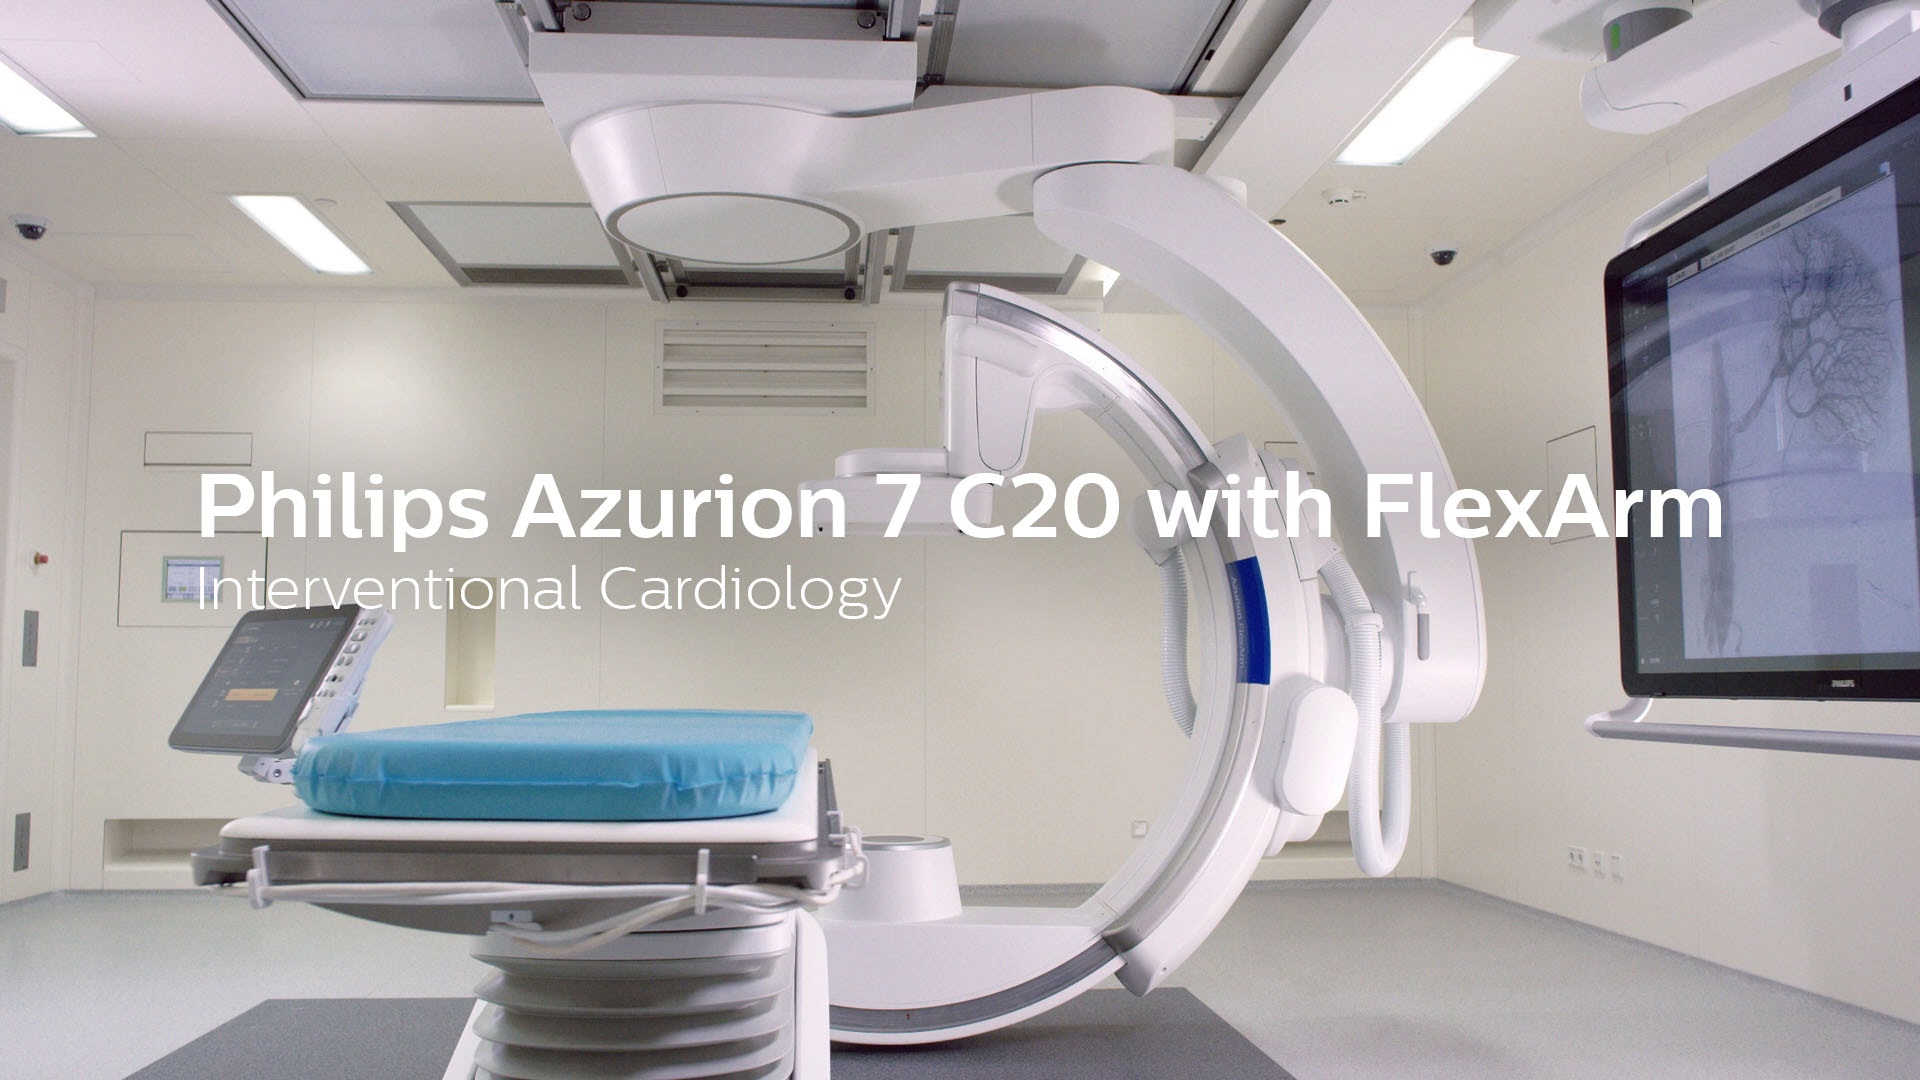 Philips Azurion 7 C20 with Flexarm interventional cardiology